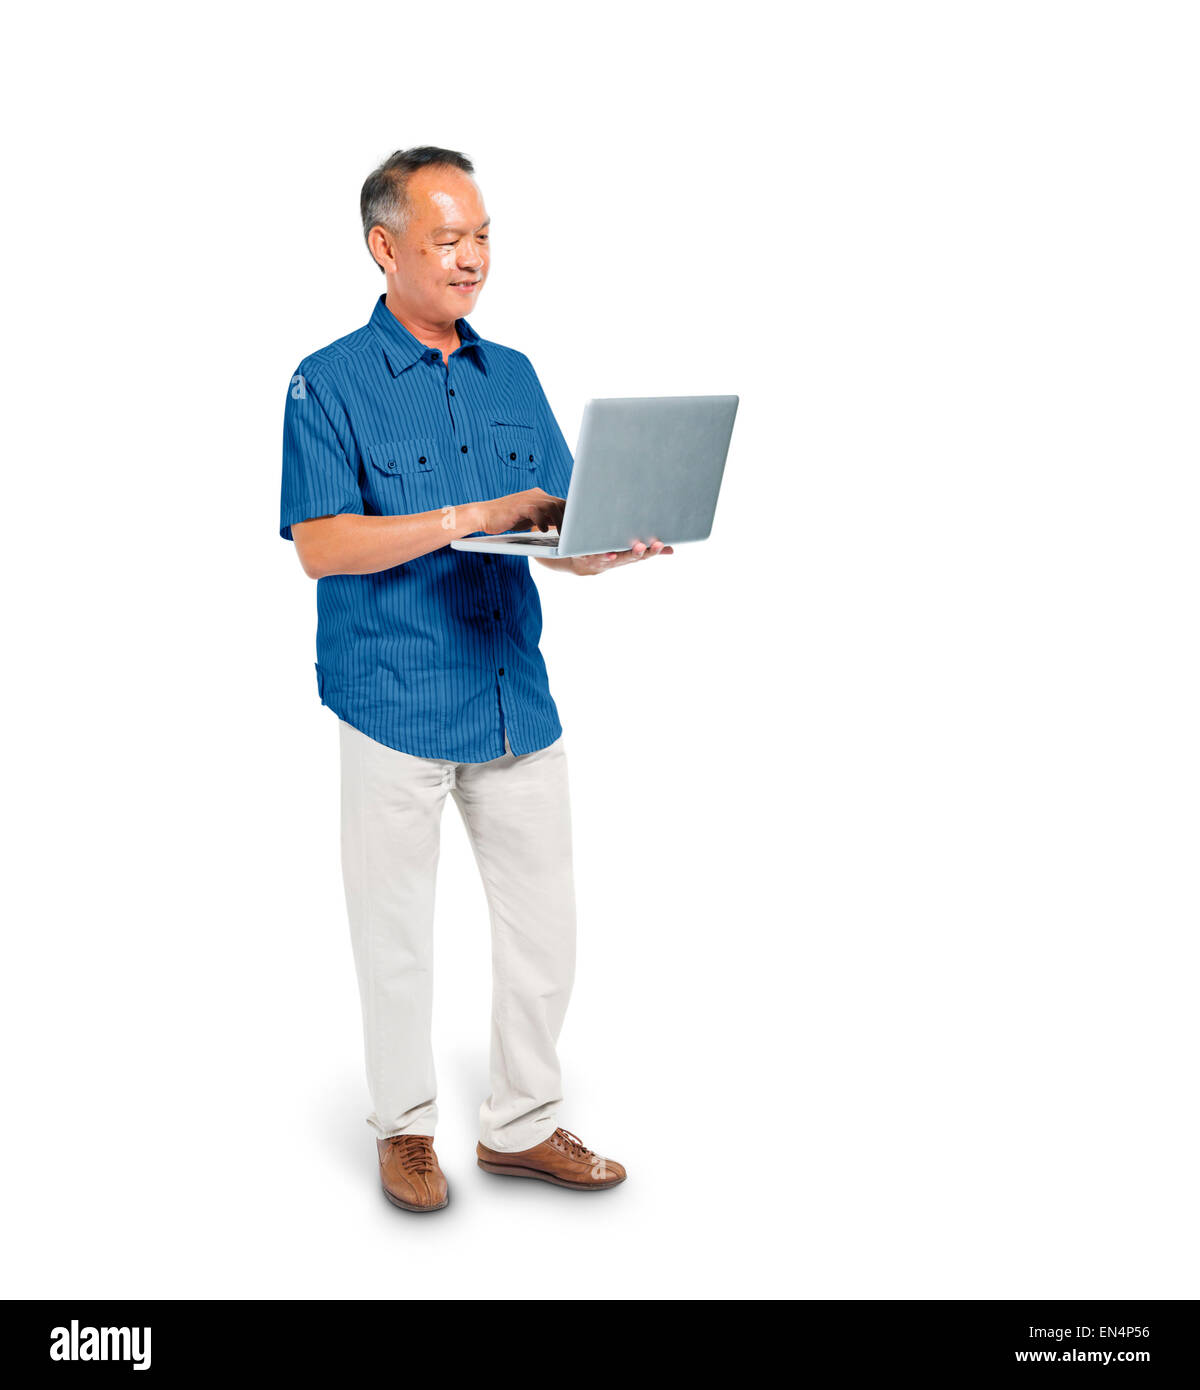 A Smart Casual Man Browsing the Internet with his Laptop Stock Photo